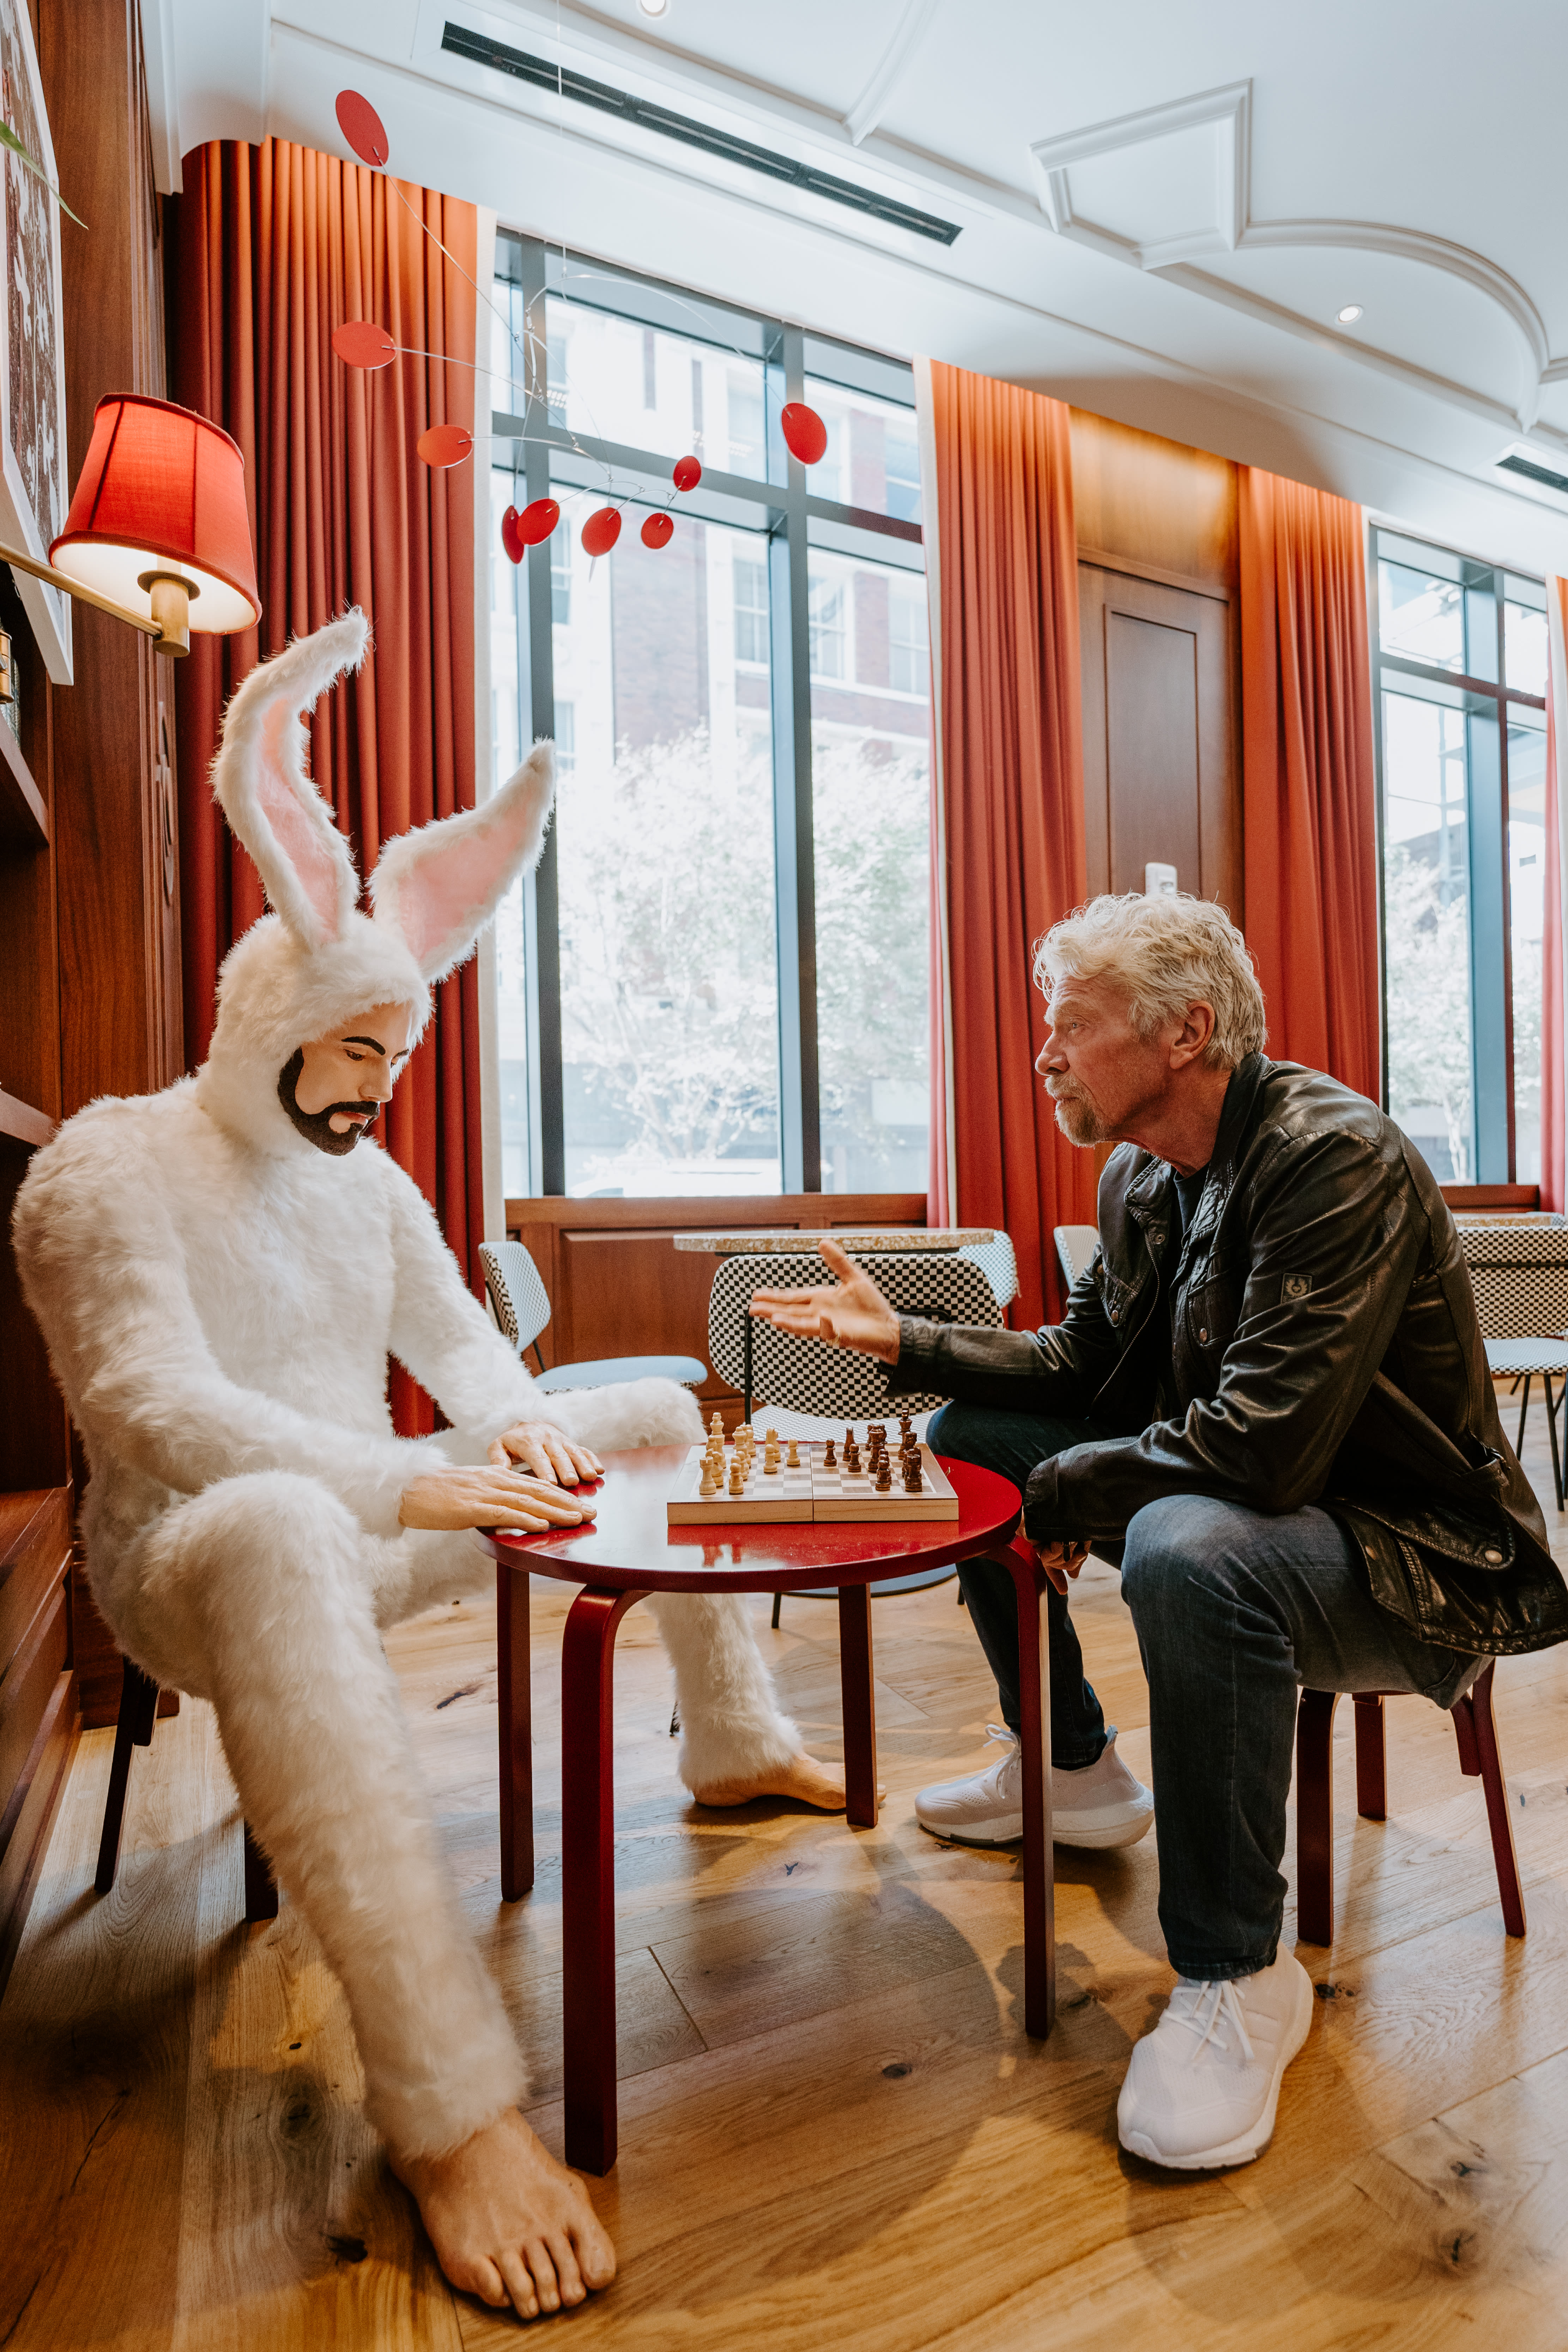 Richard Branson playing chess with a bunny at Virgin Hotels New Orleans